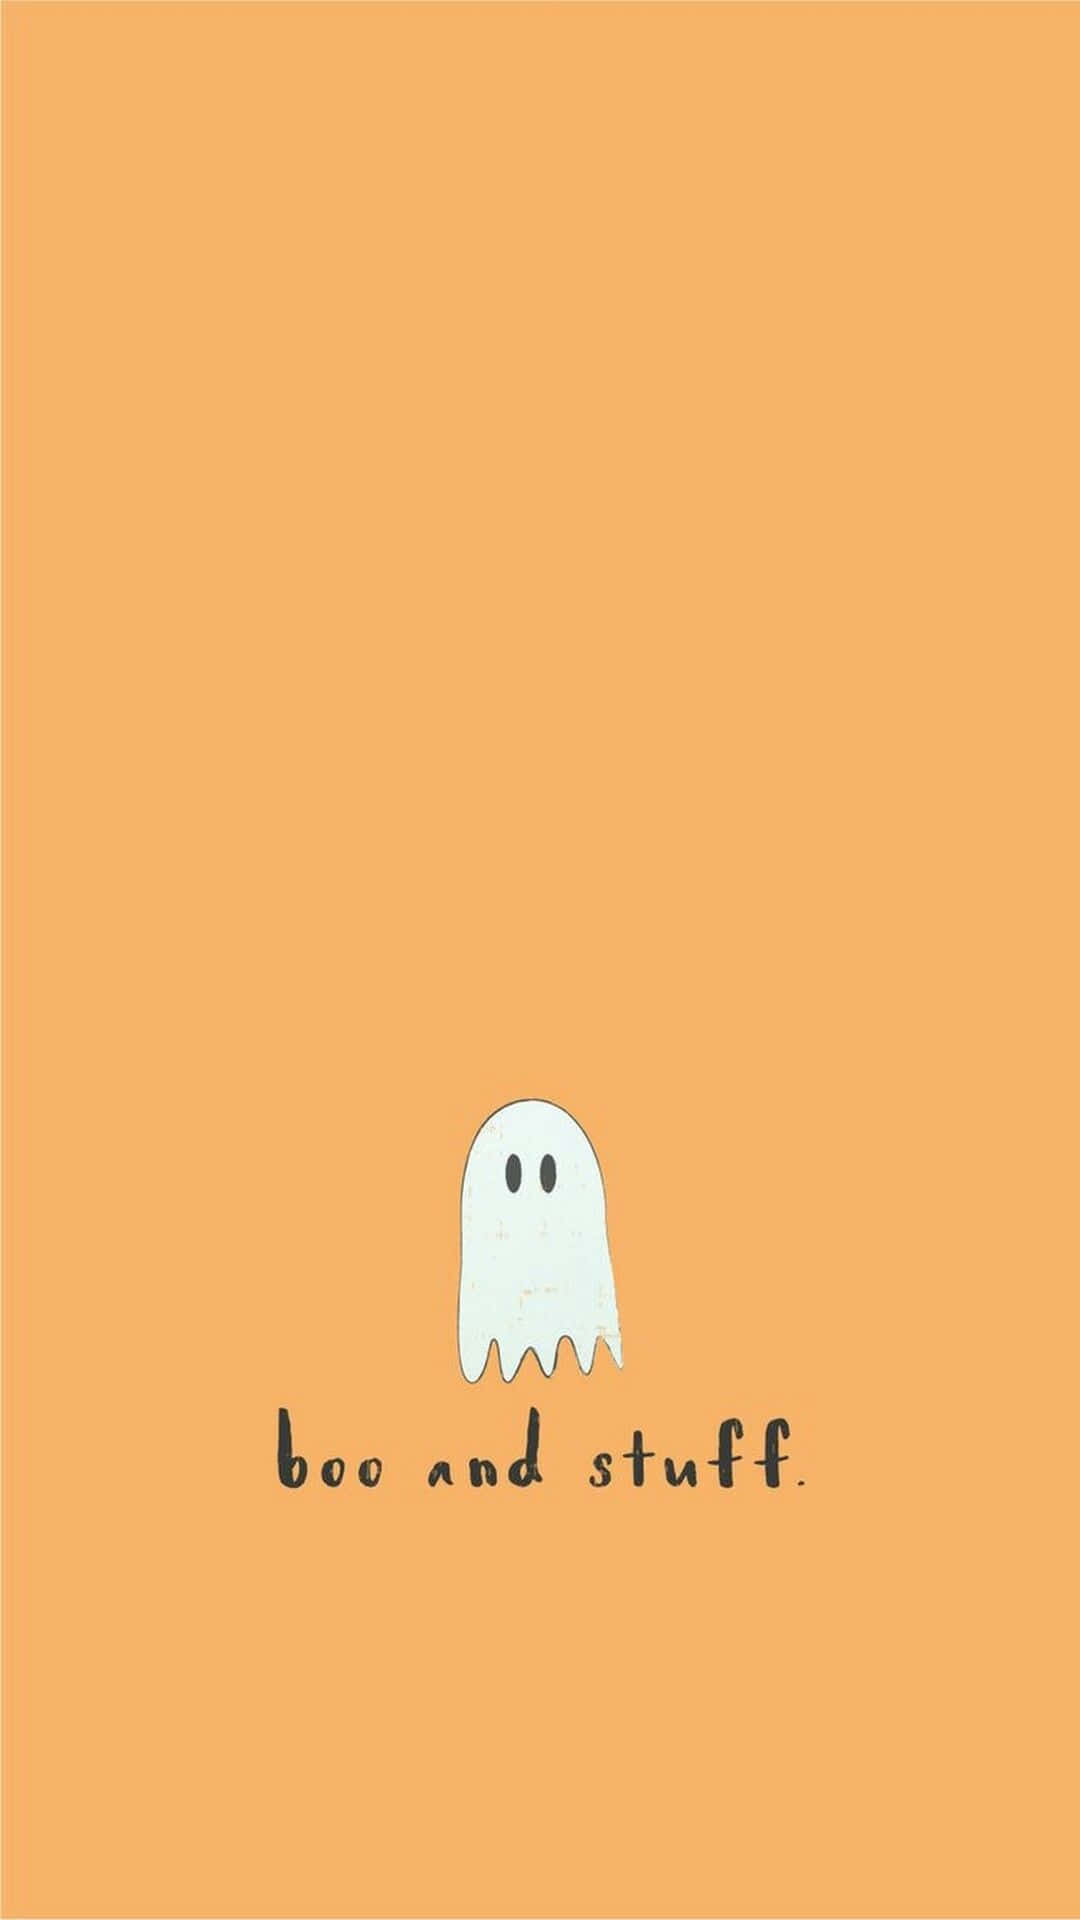 Boo And Stuff offers fun, unique products for your home Wallpaper